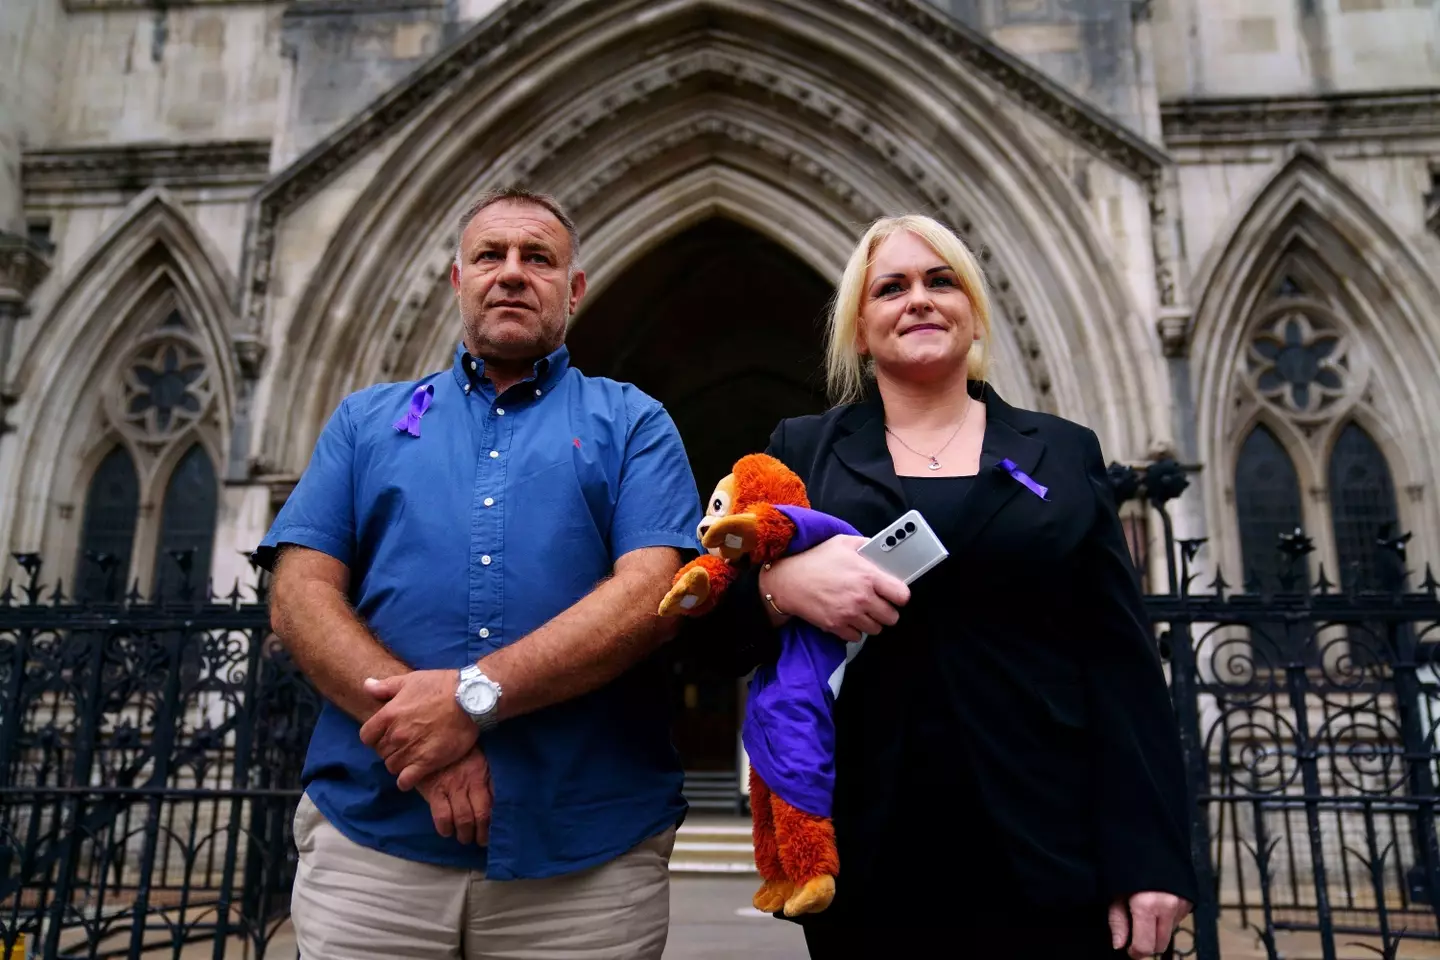 Archie's parents have claimed turning off his life support would violate human rights laws.